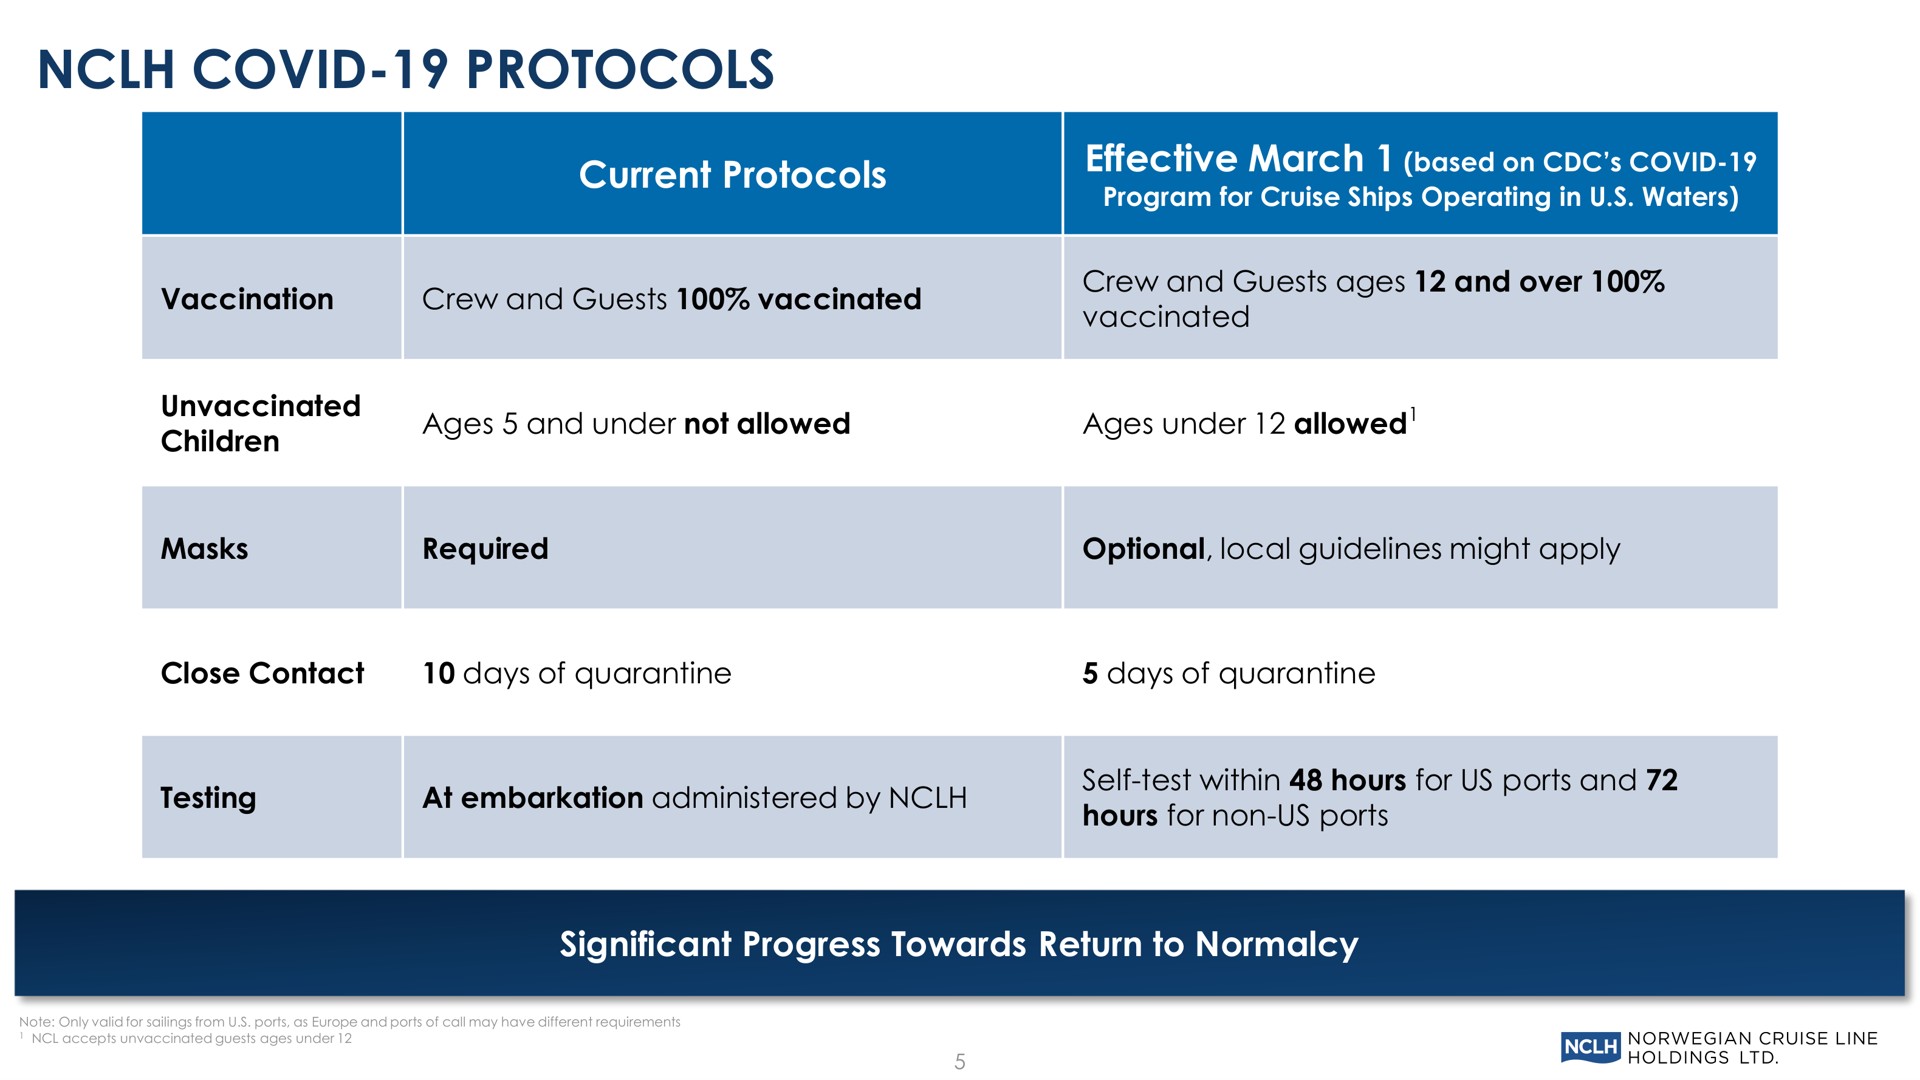 covid protocols current protocols significant progress towards return to normalcy effective march based on | Norwegian Cruise Line